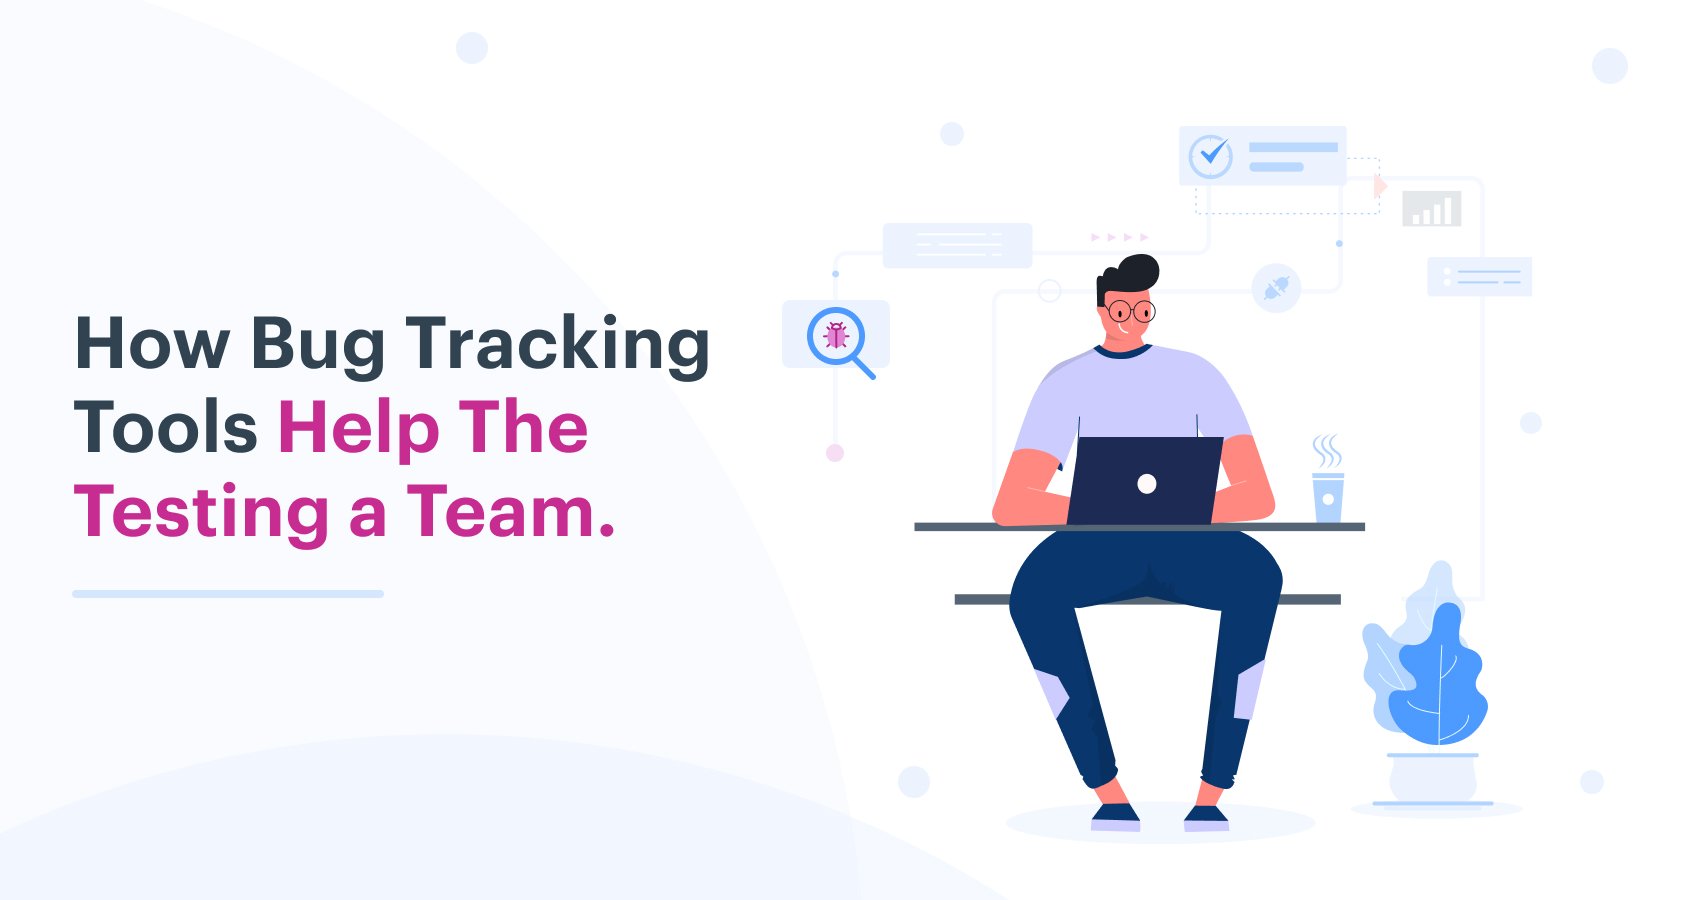 How Bug Tracking Tools Helps the Testing Team